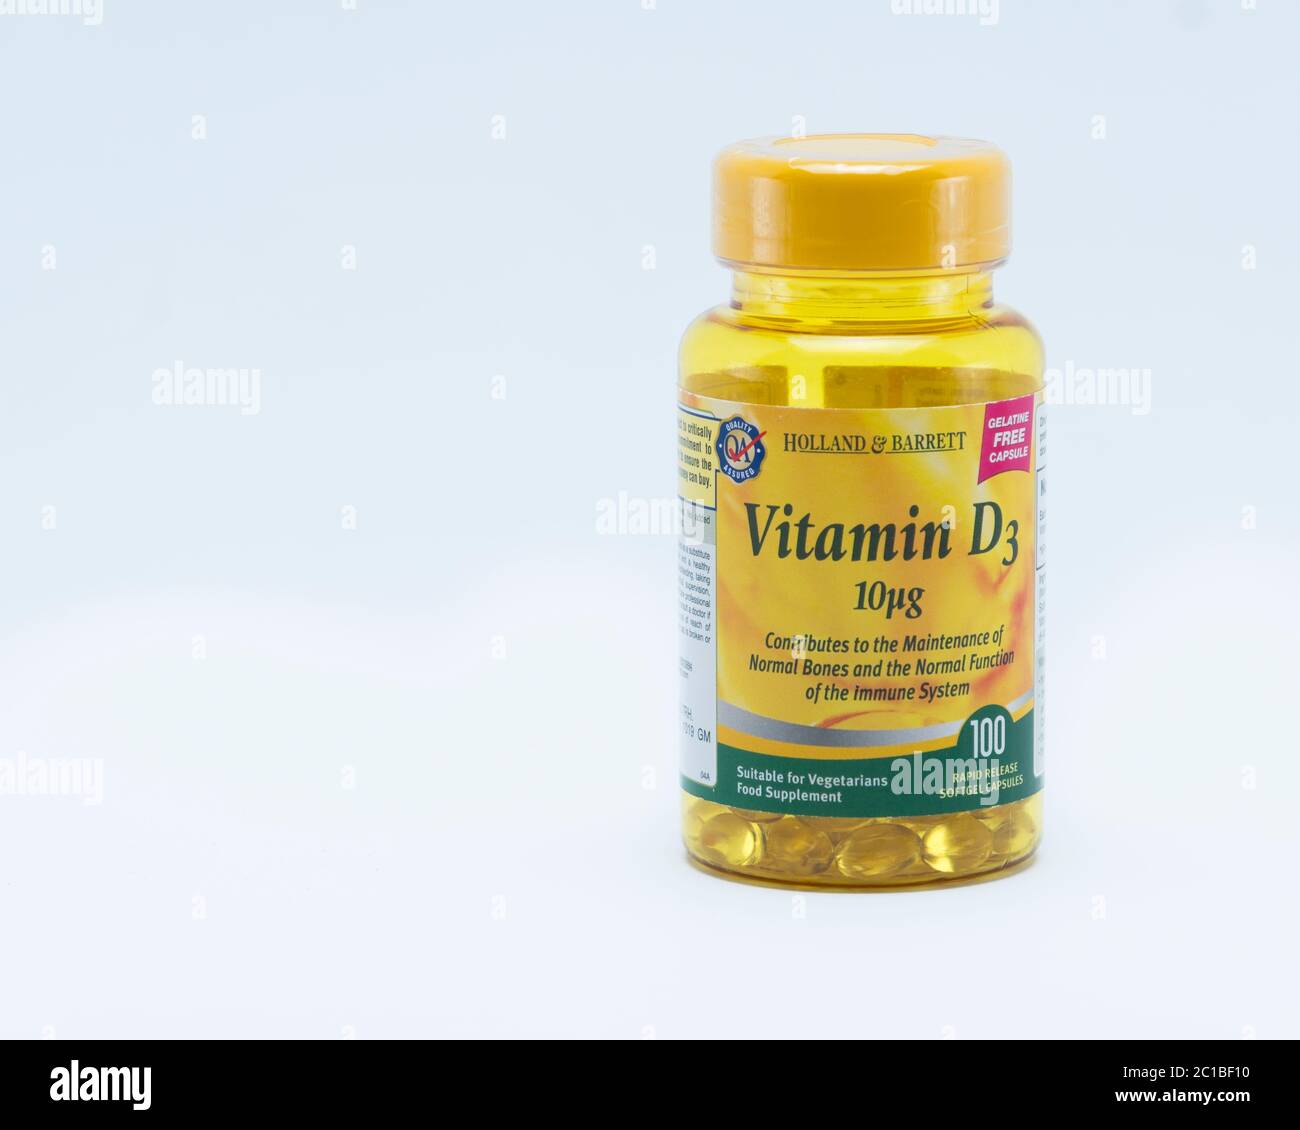 A bottle of Vitamin D Supplement. Stock Photo